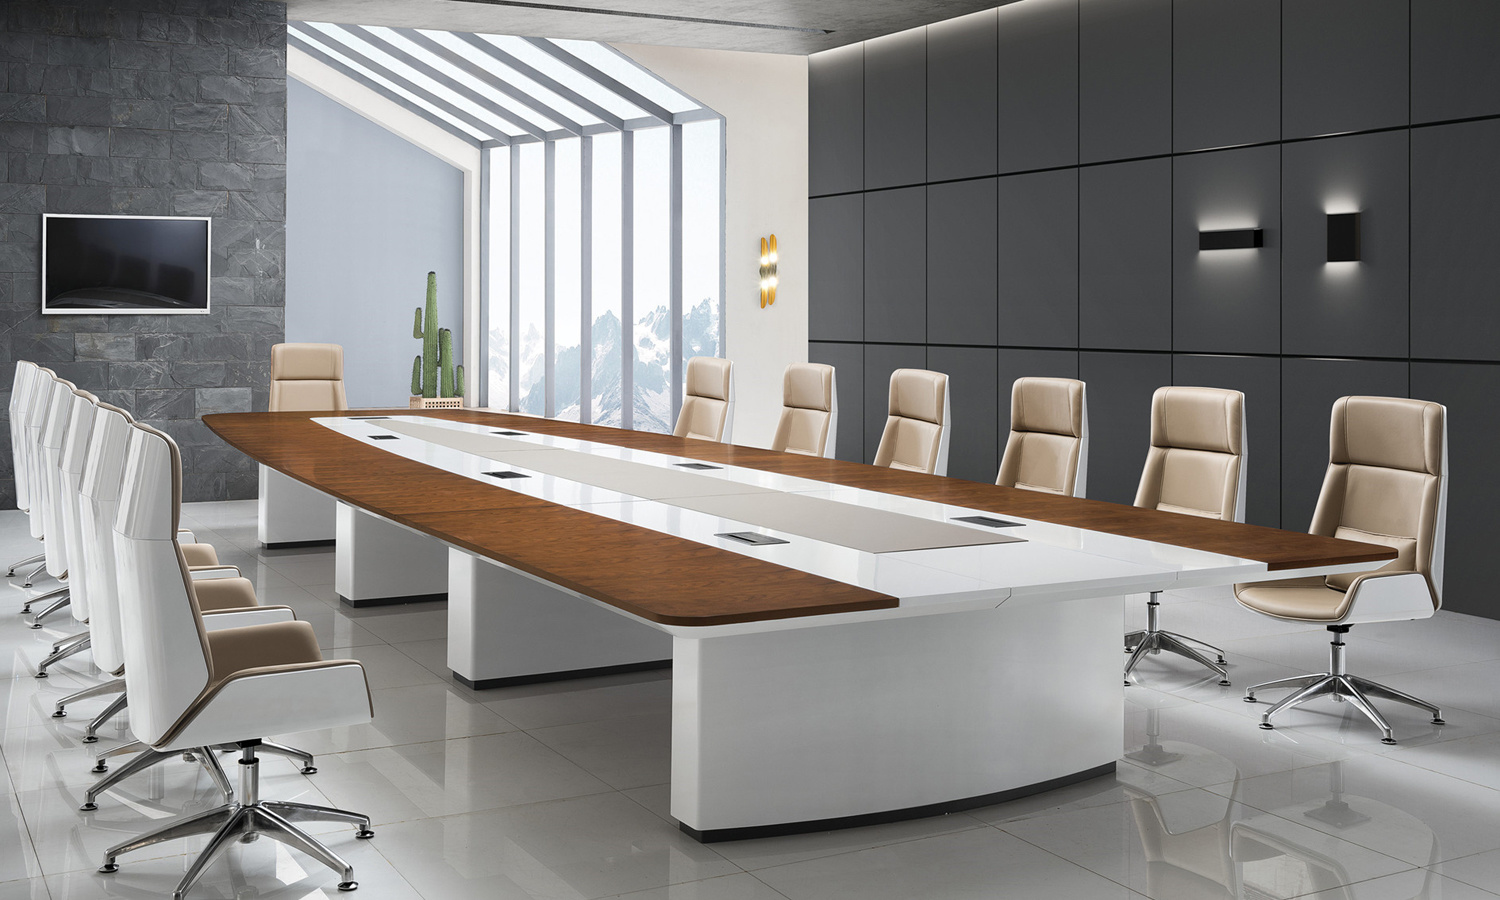  Meeting table in office